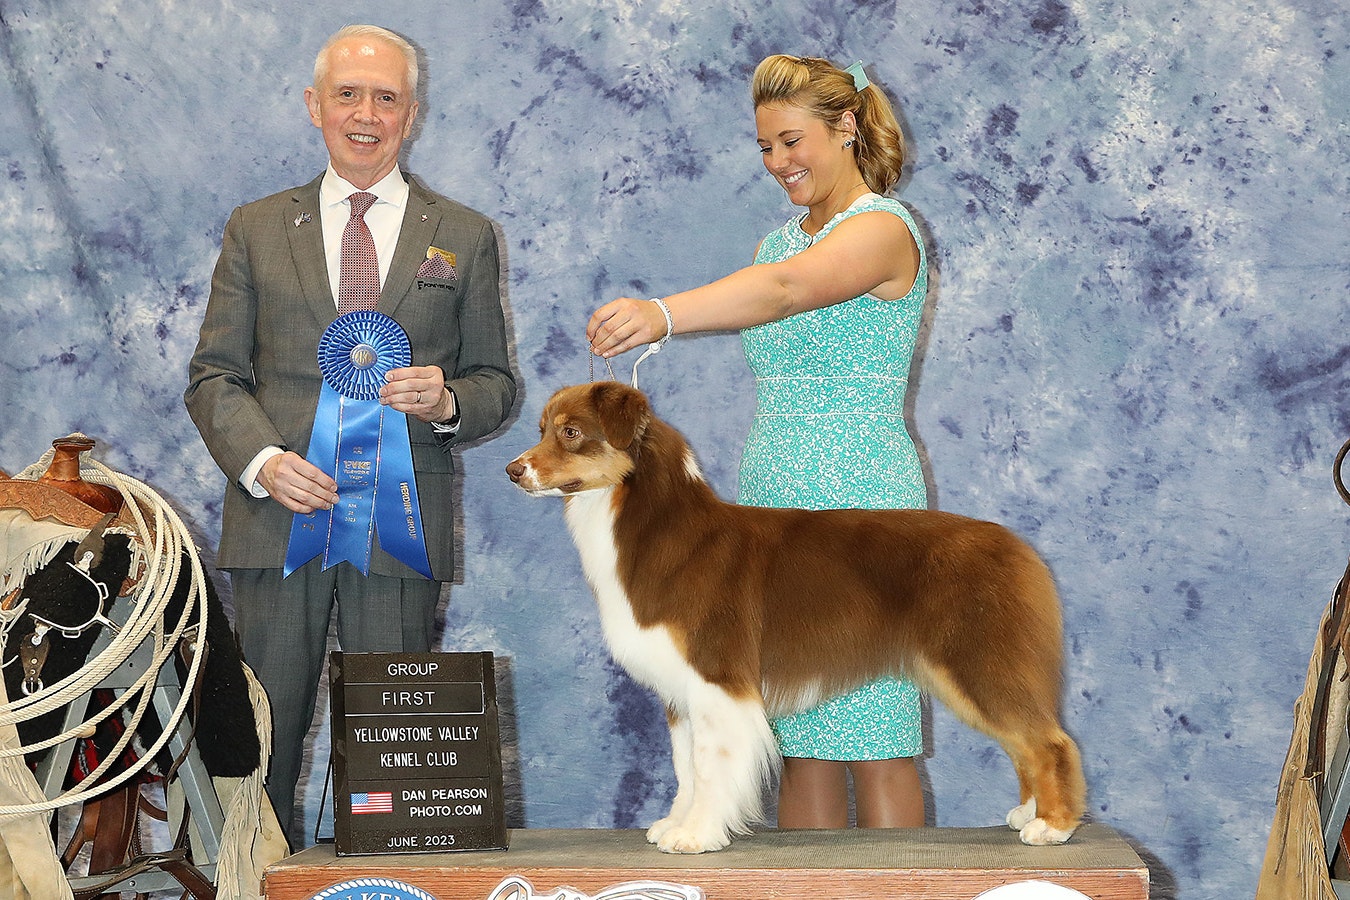 Shelby Shank said her 6-year-old dog will go into semi-retirement next year after a long string of dog show successes.